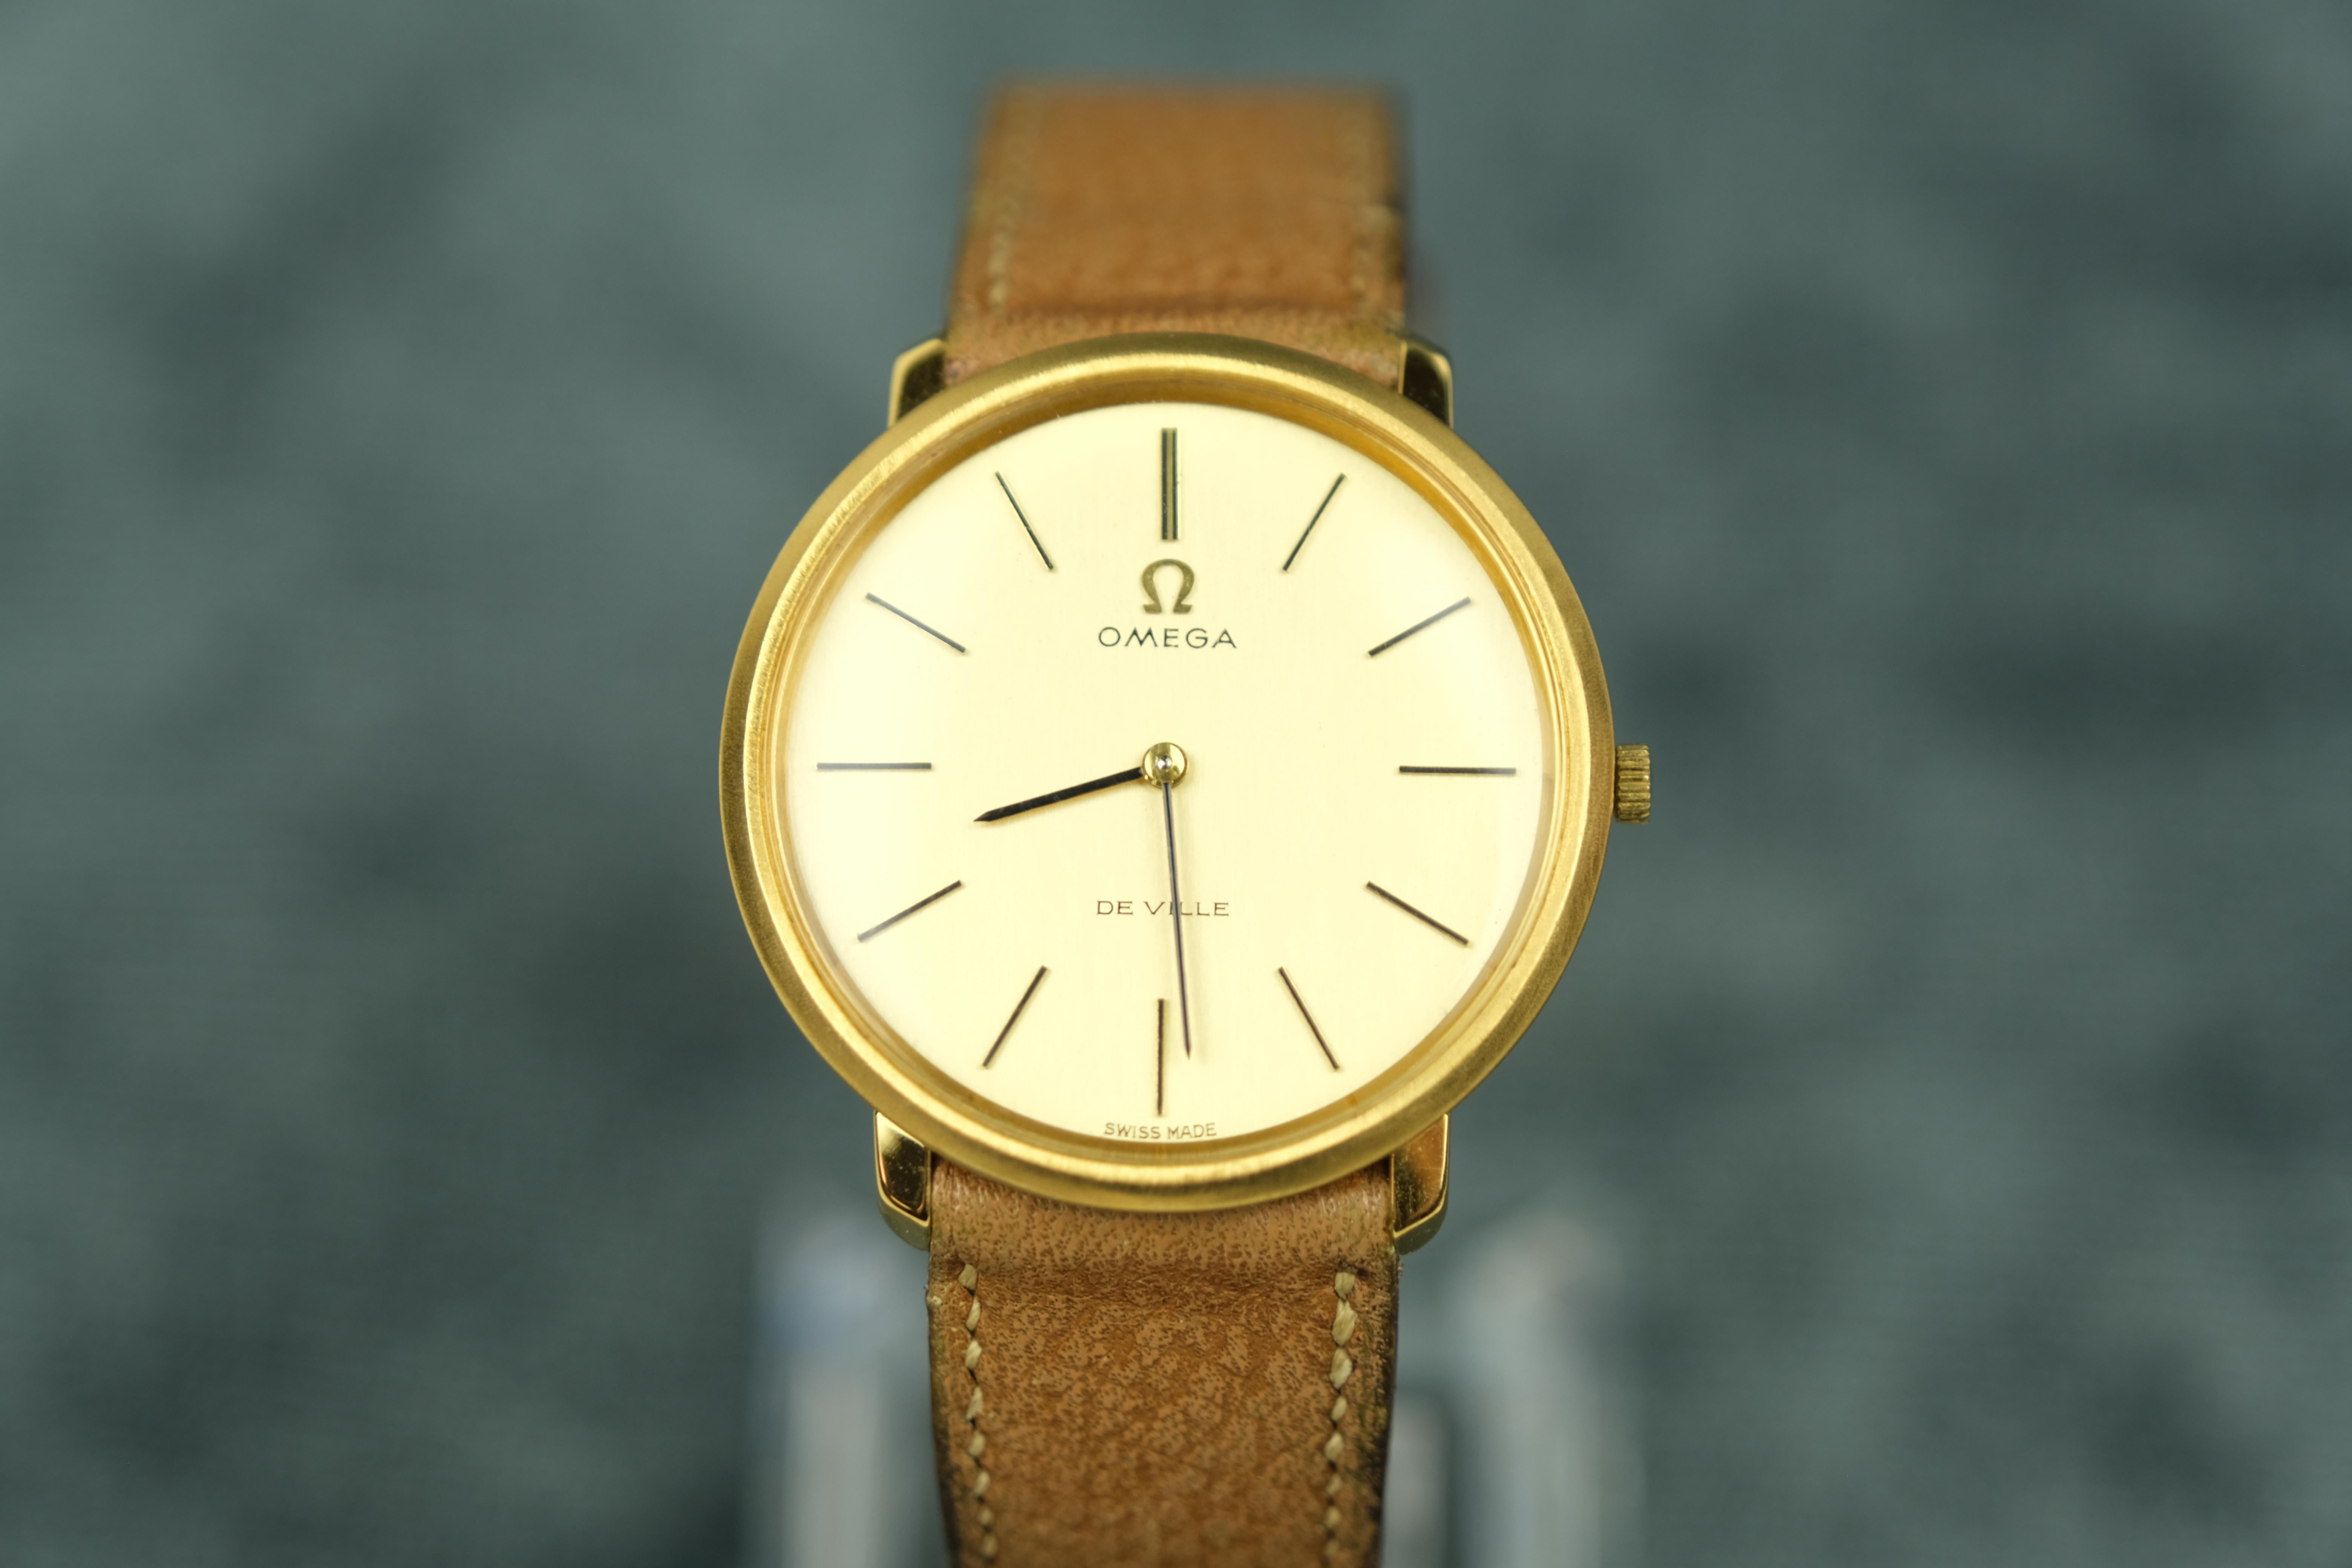 Vintage Omega De Ville Gold Tone Stem Wind circa 1969.

BASIC INFO
Movement: Manual, Omega Cal.620, 17 Jewels
Estimated Production Year: 1969

CASE
Case Material: Gold Plate, Stainless Steel
Bezel Material: Gold Plate, Stainless